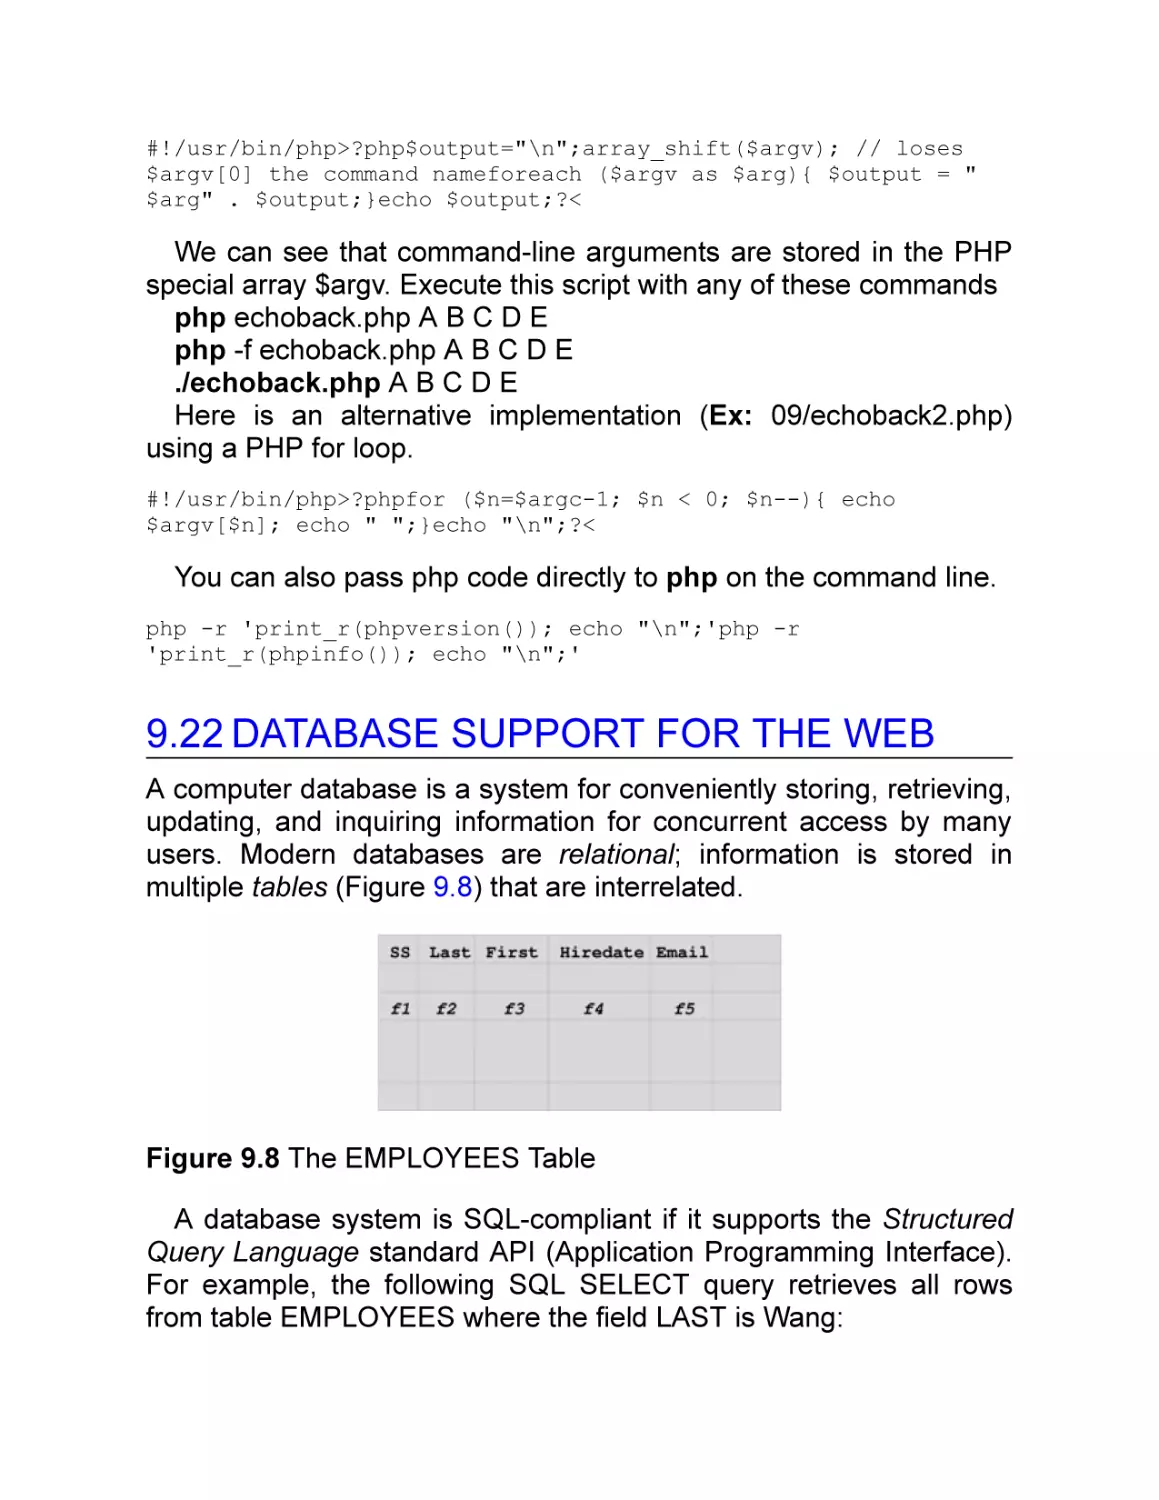 9.22 Database Support for the Web